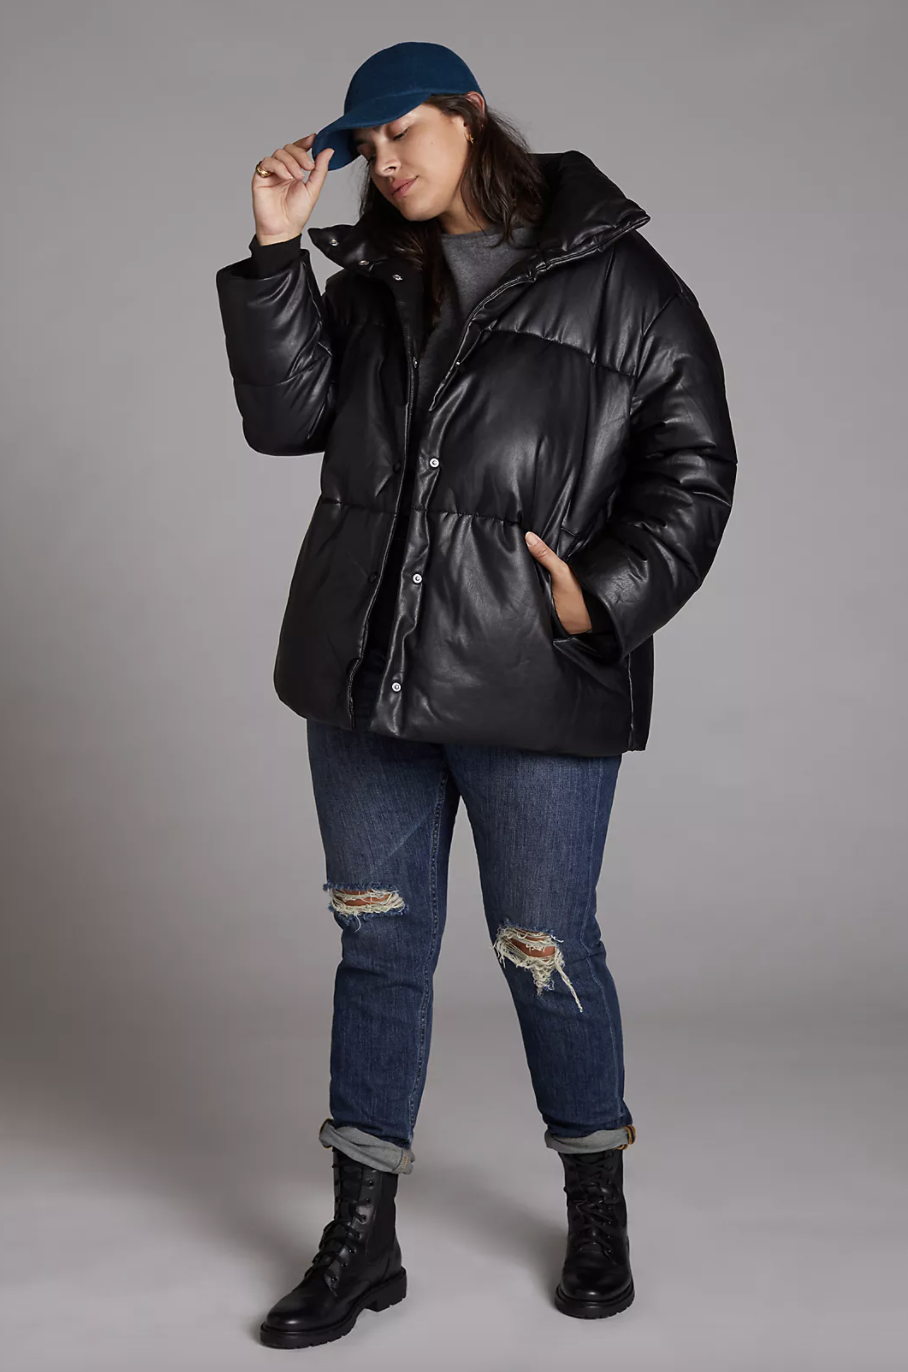 black anthropologie Faux Leather Puffer Coat plus size model wearing jeans and boots